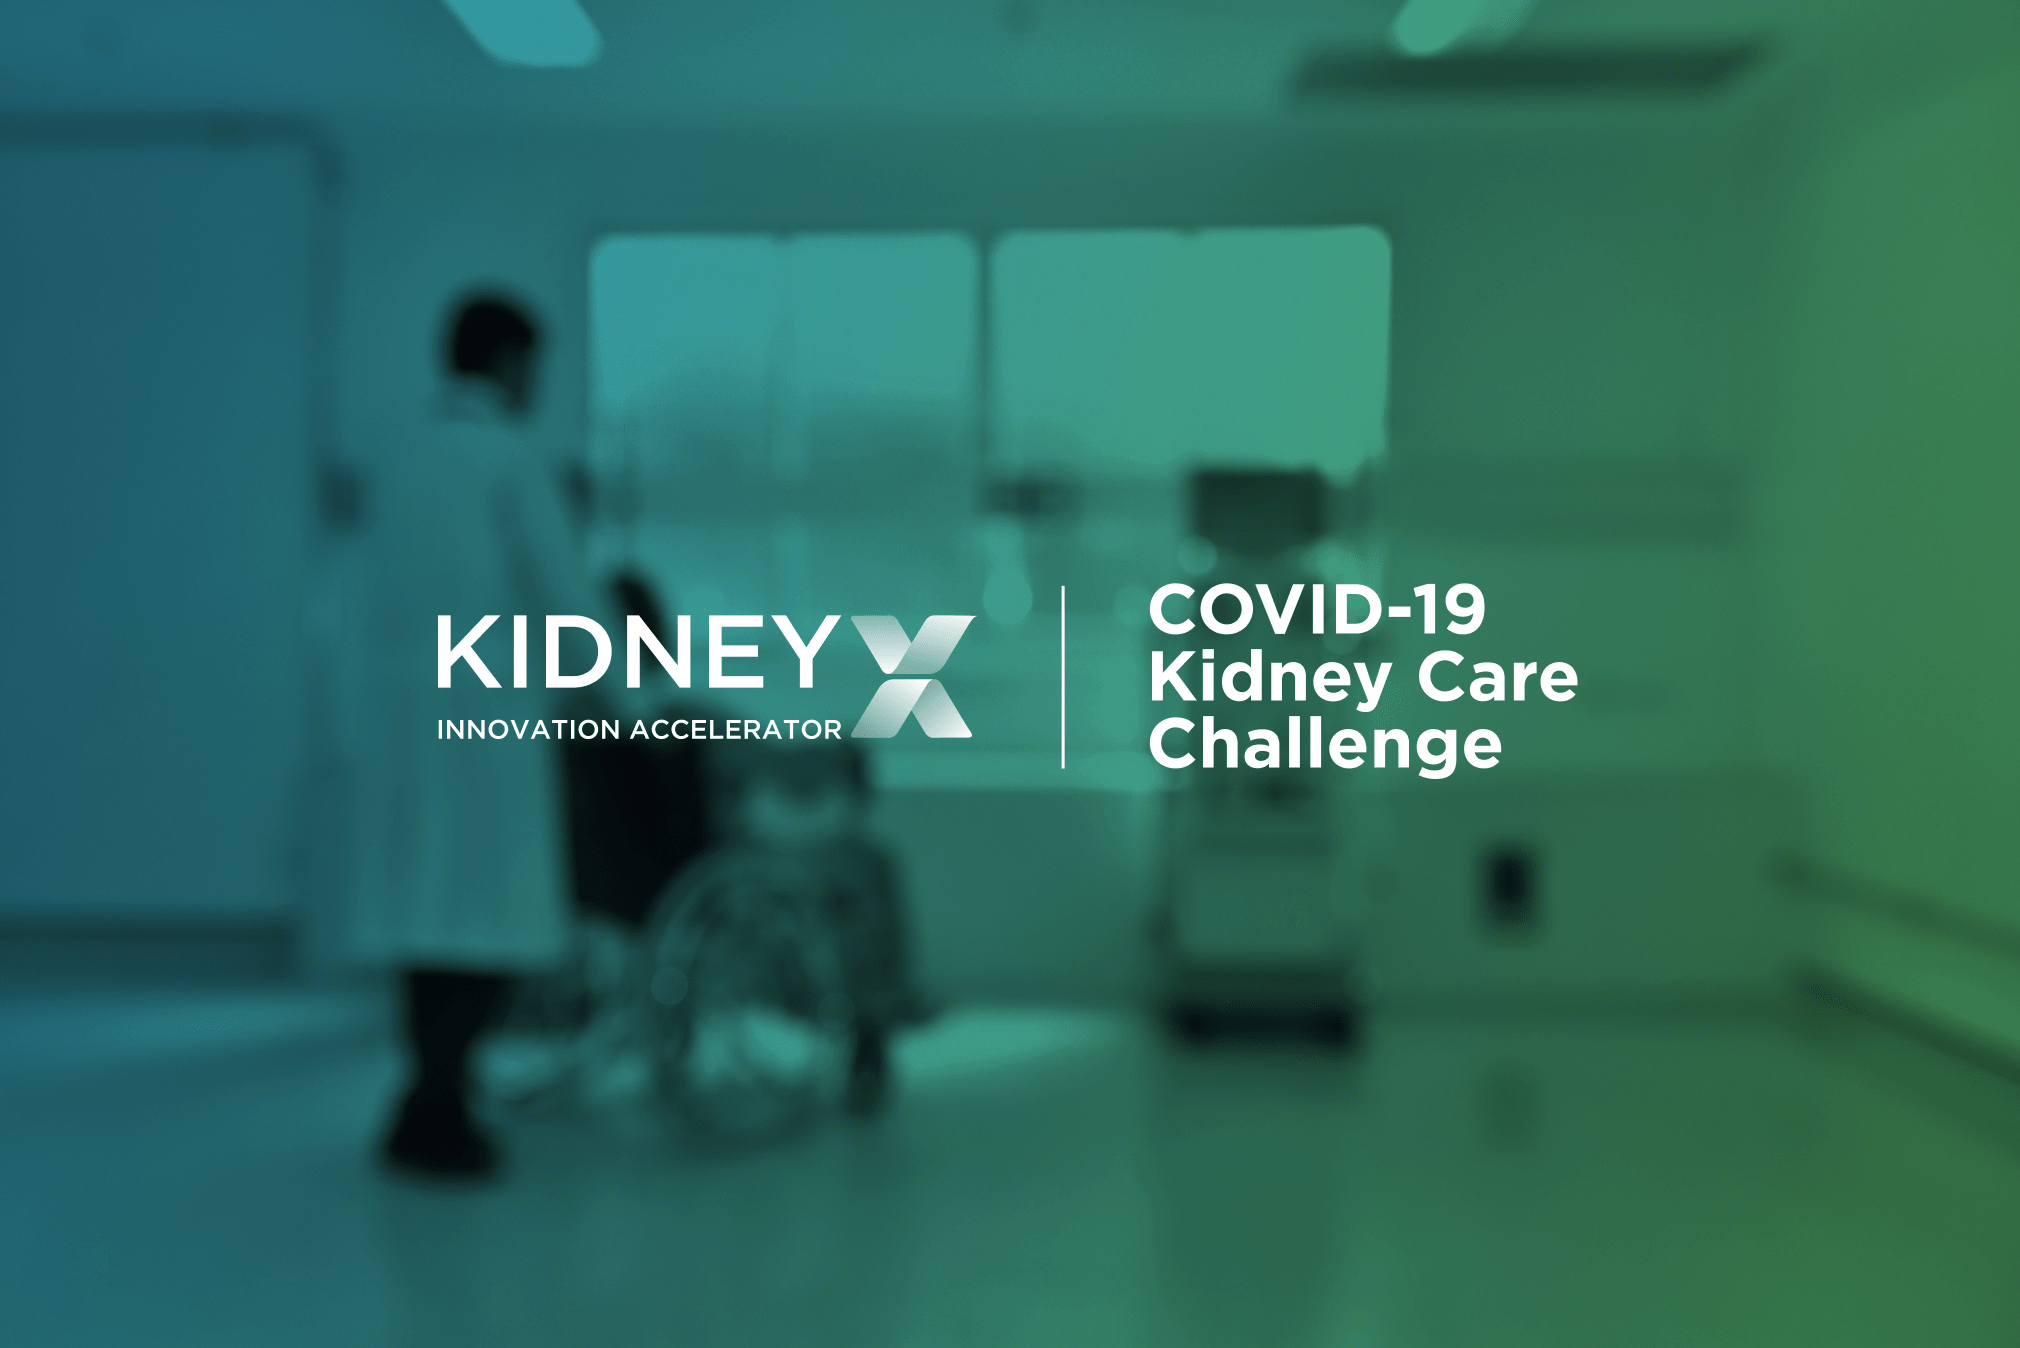 Identifying and sharing kidney care solutions that reduce risk during the pandemic